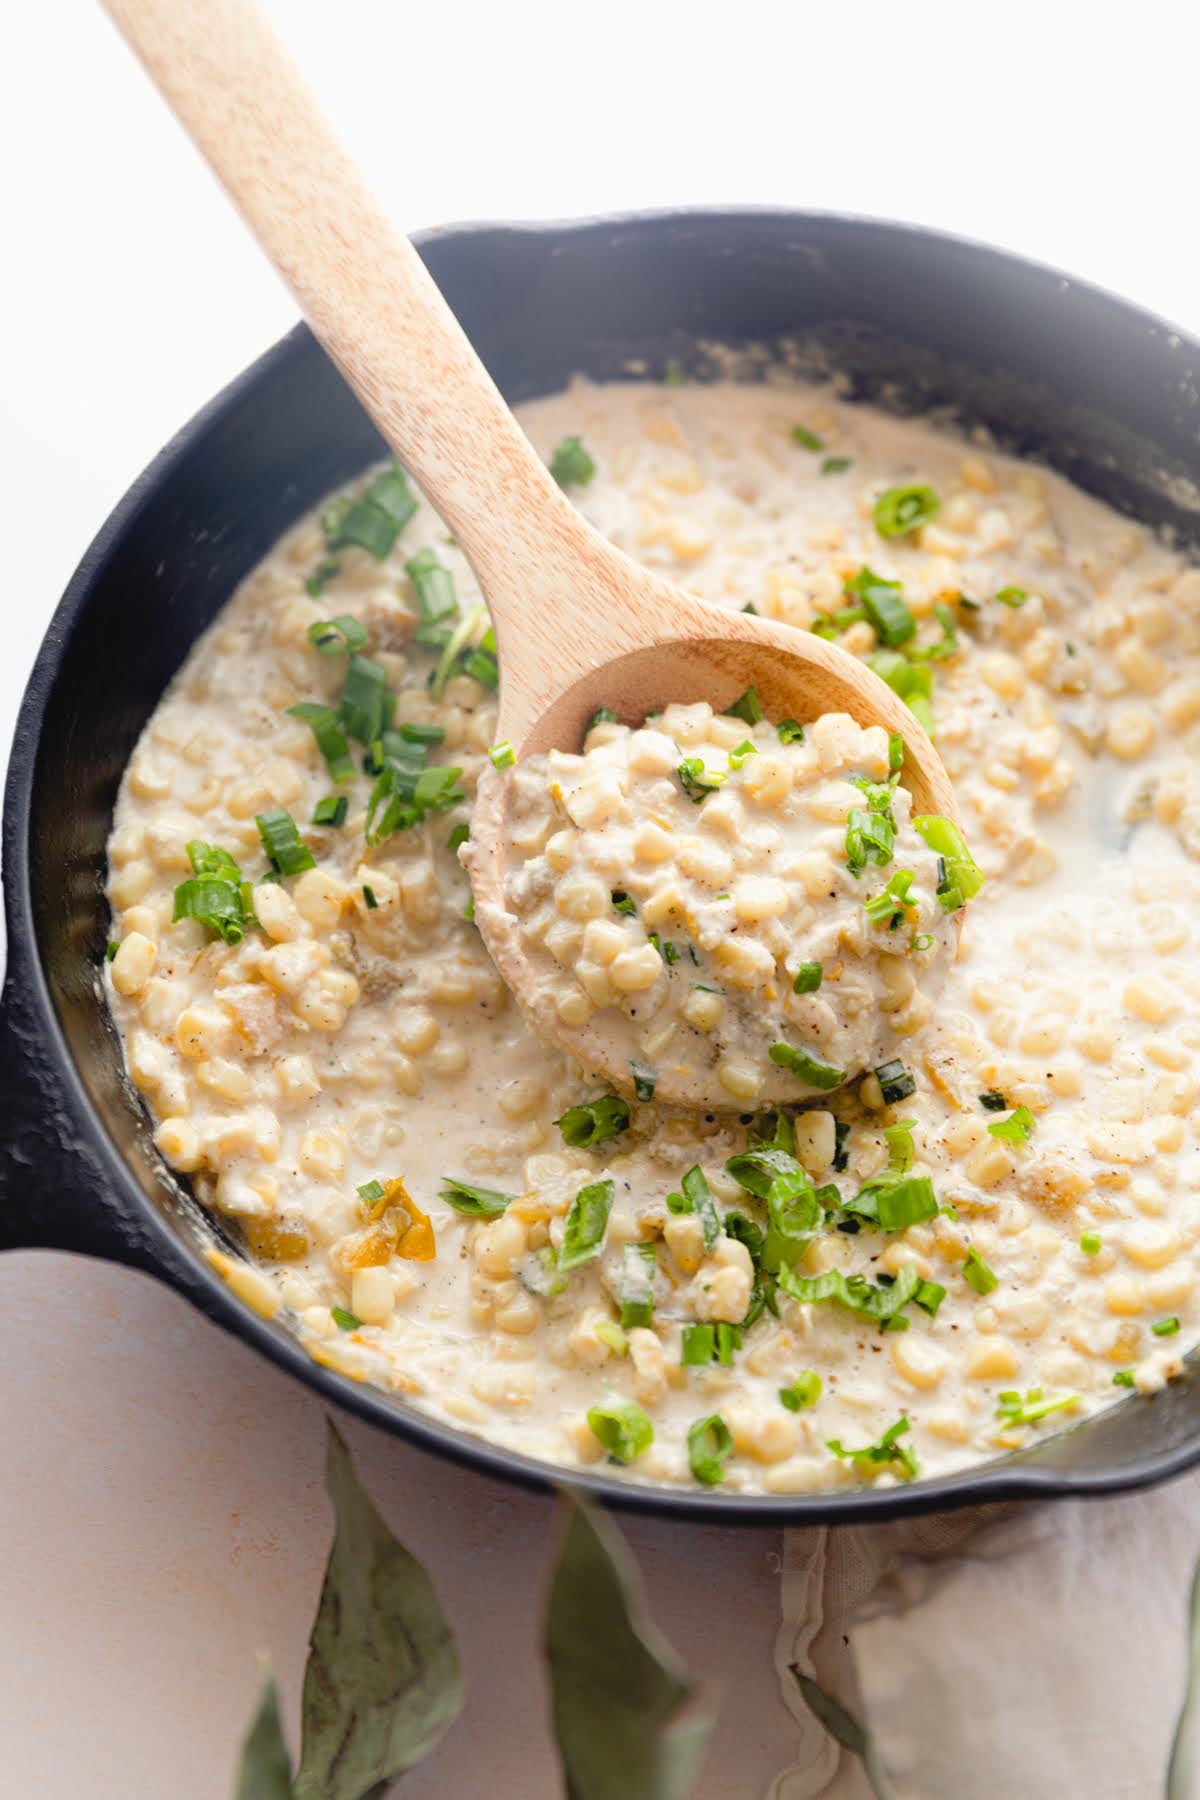 The Complete Dairy-Free Creamed Corn Recipe for Healthy Eating